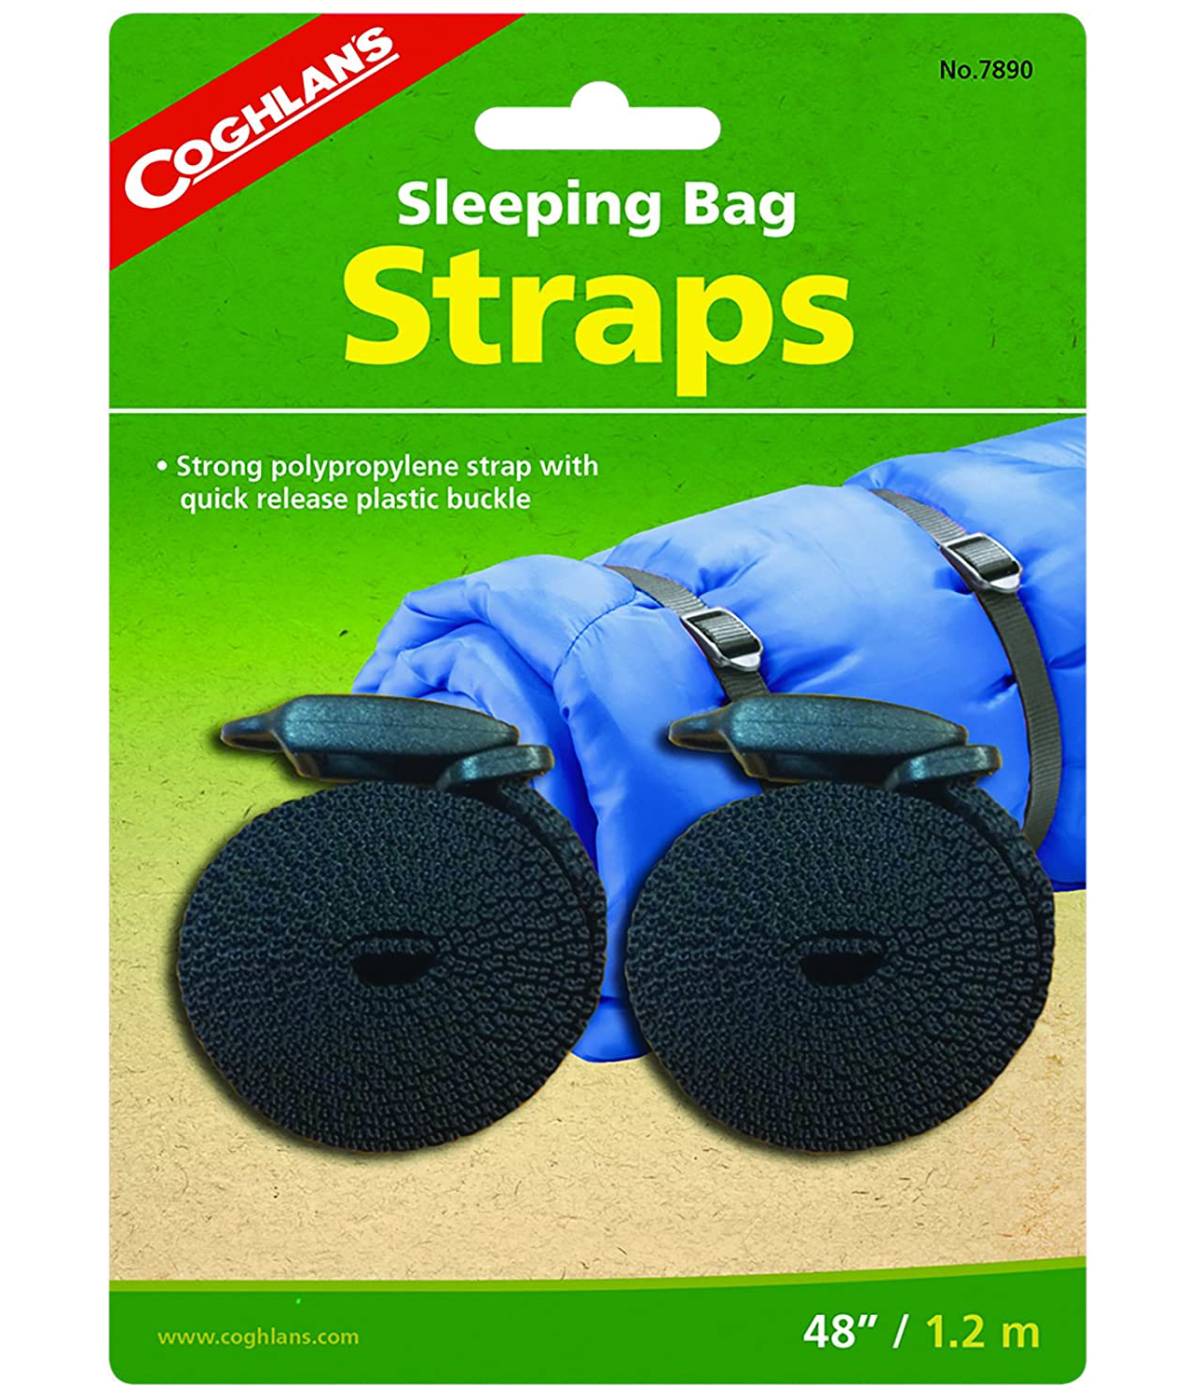 Sleeping Bag StrapsAttach sleeping bag to Backpack pic